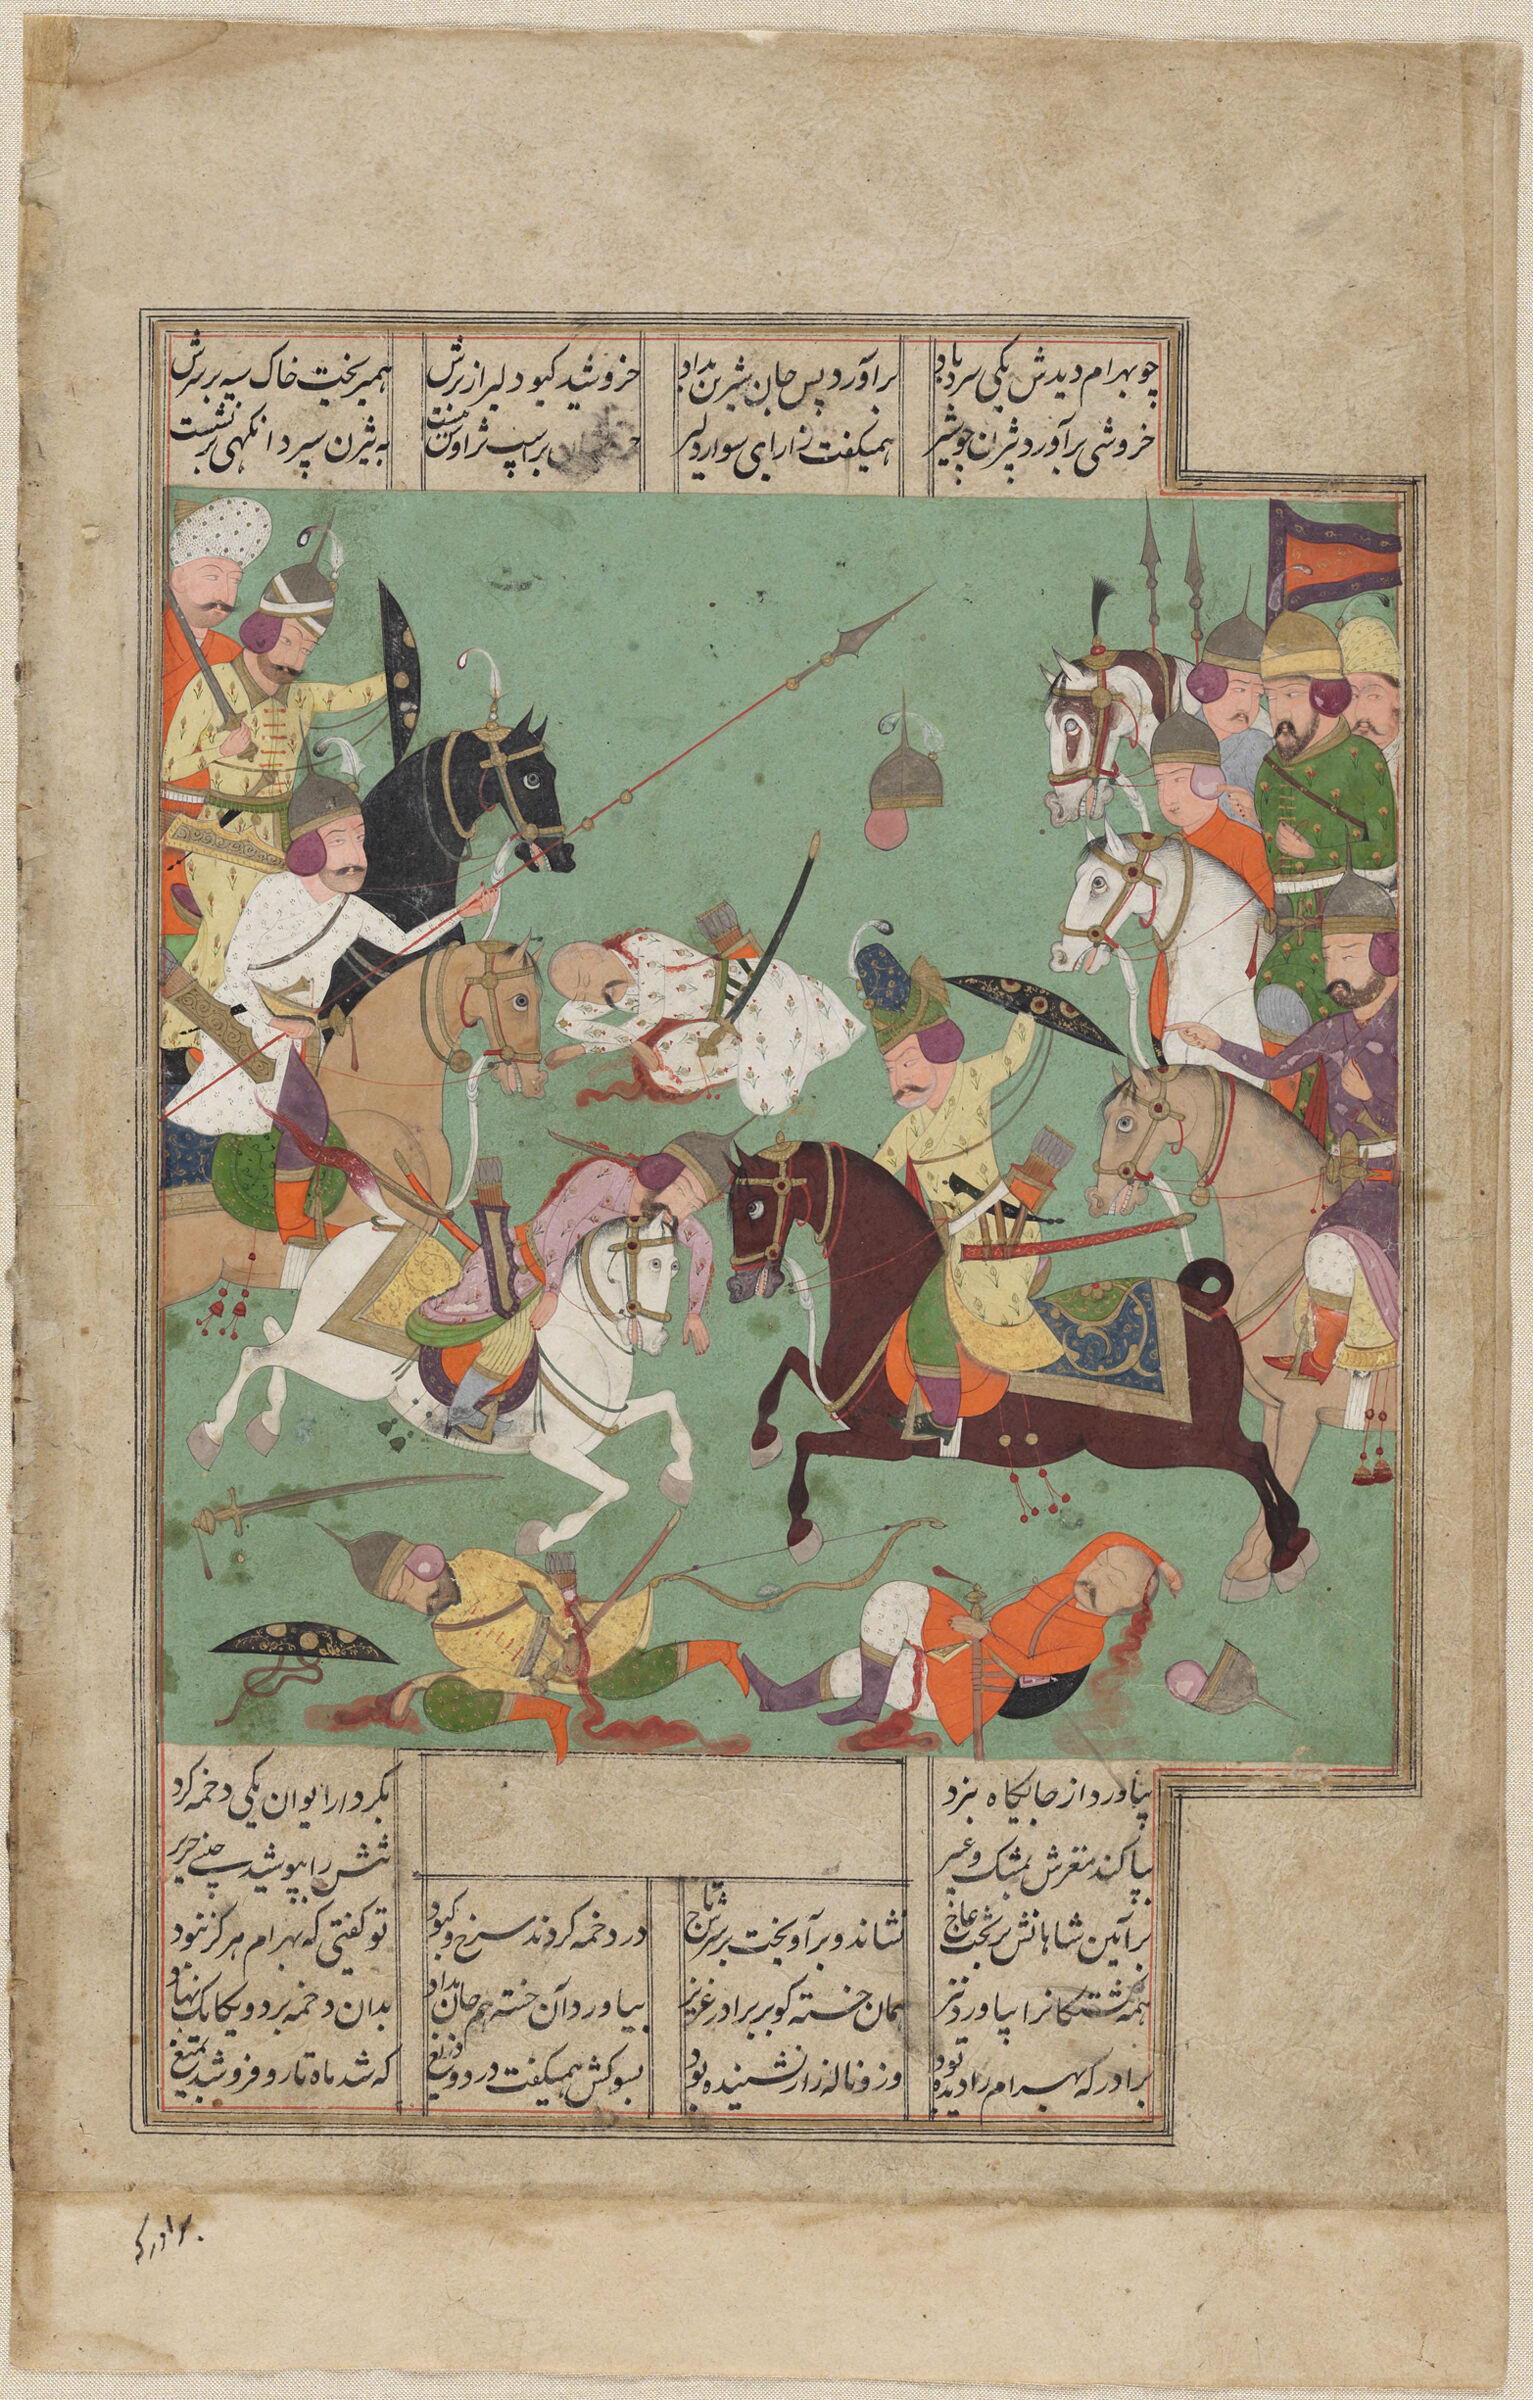 Giv Strikes Tizhaw On The Shoulder (Text Recto; Painting Verso Of 178), Illustrated Folio From A Manuscript Of The Shahnama By Firdawsi